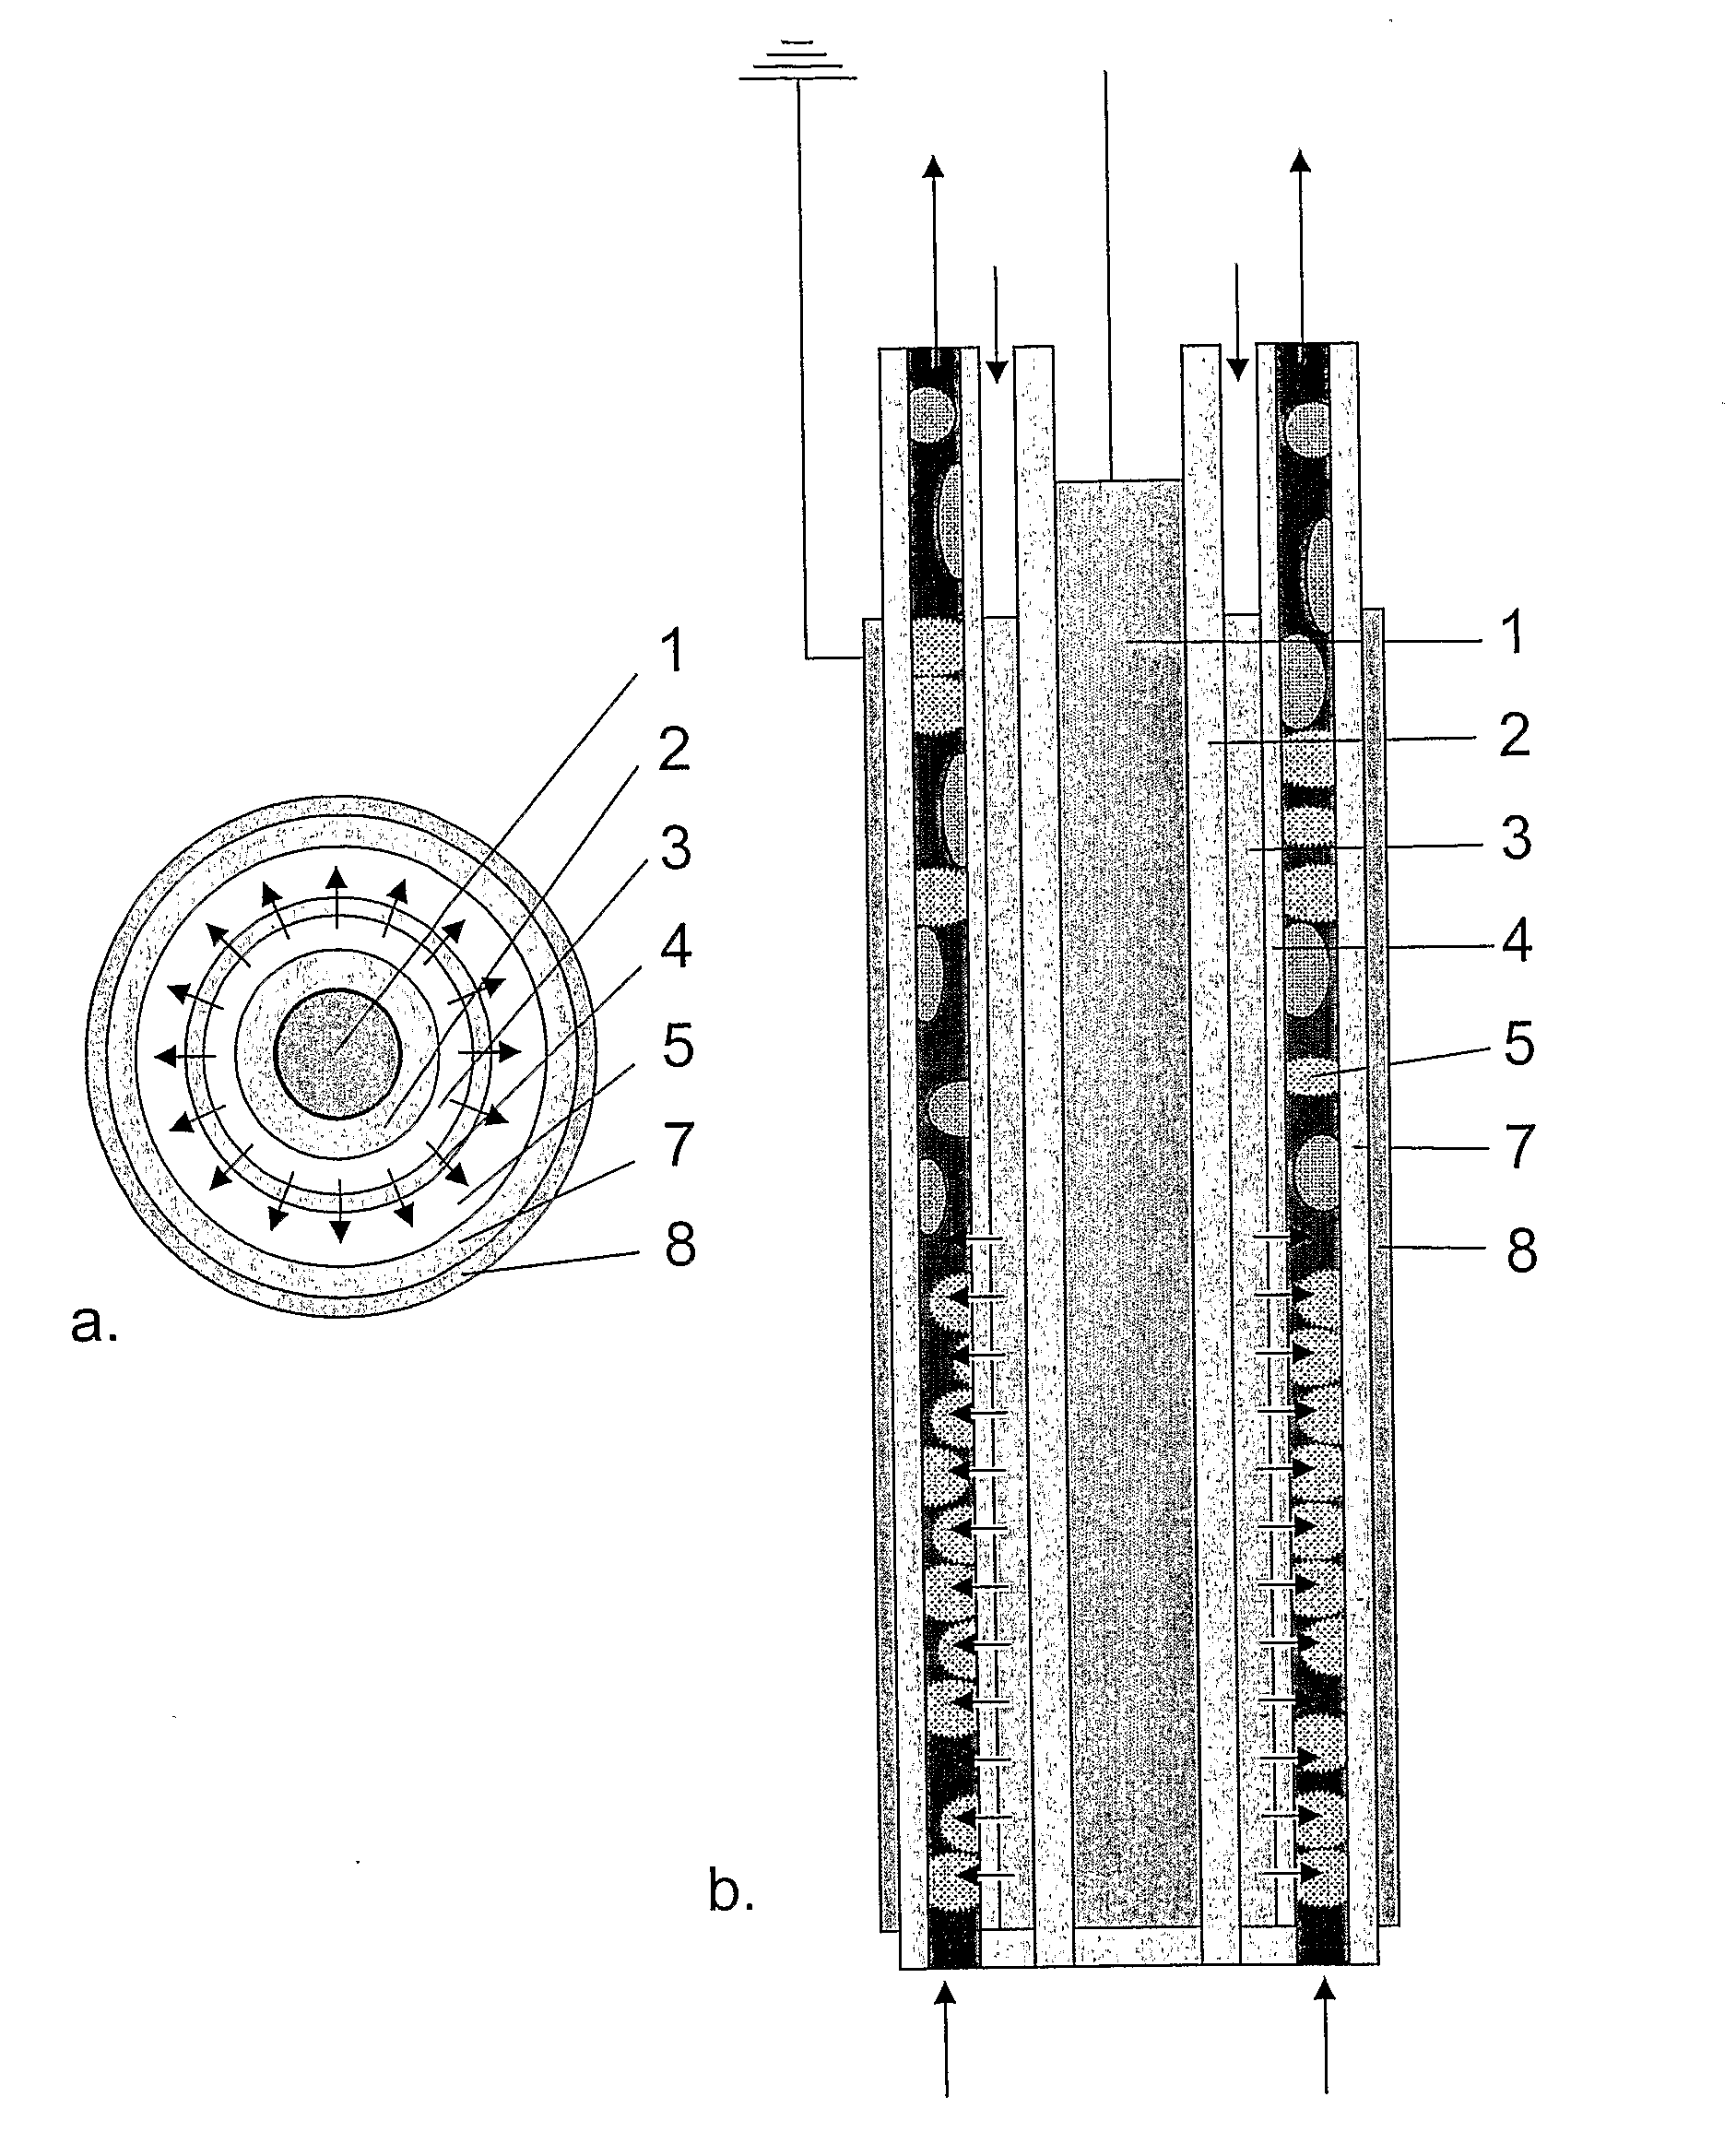 Apparatus and Method for Purification and Disinfection of Liquid, Solid or Gaseous Substances